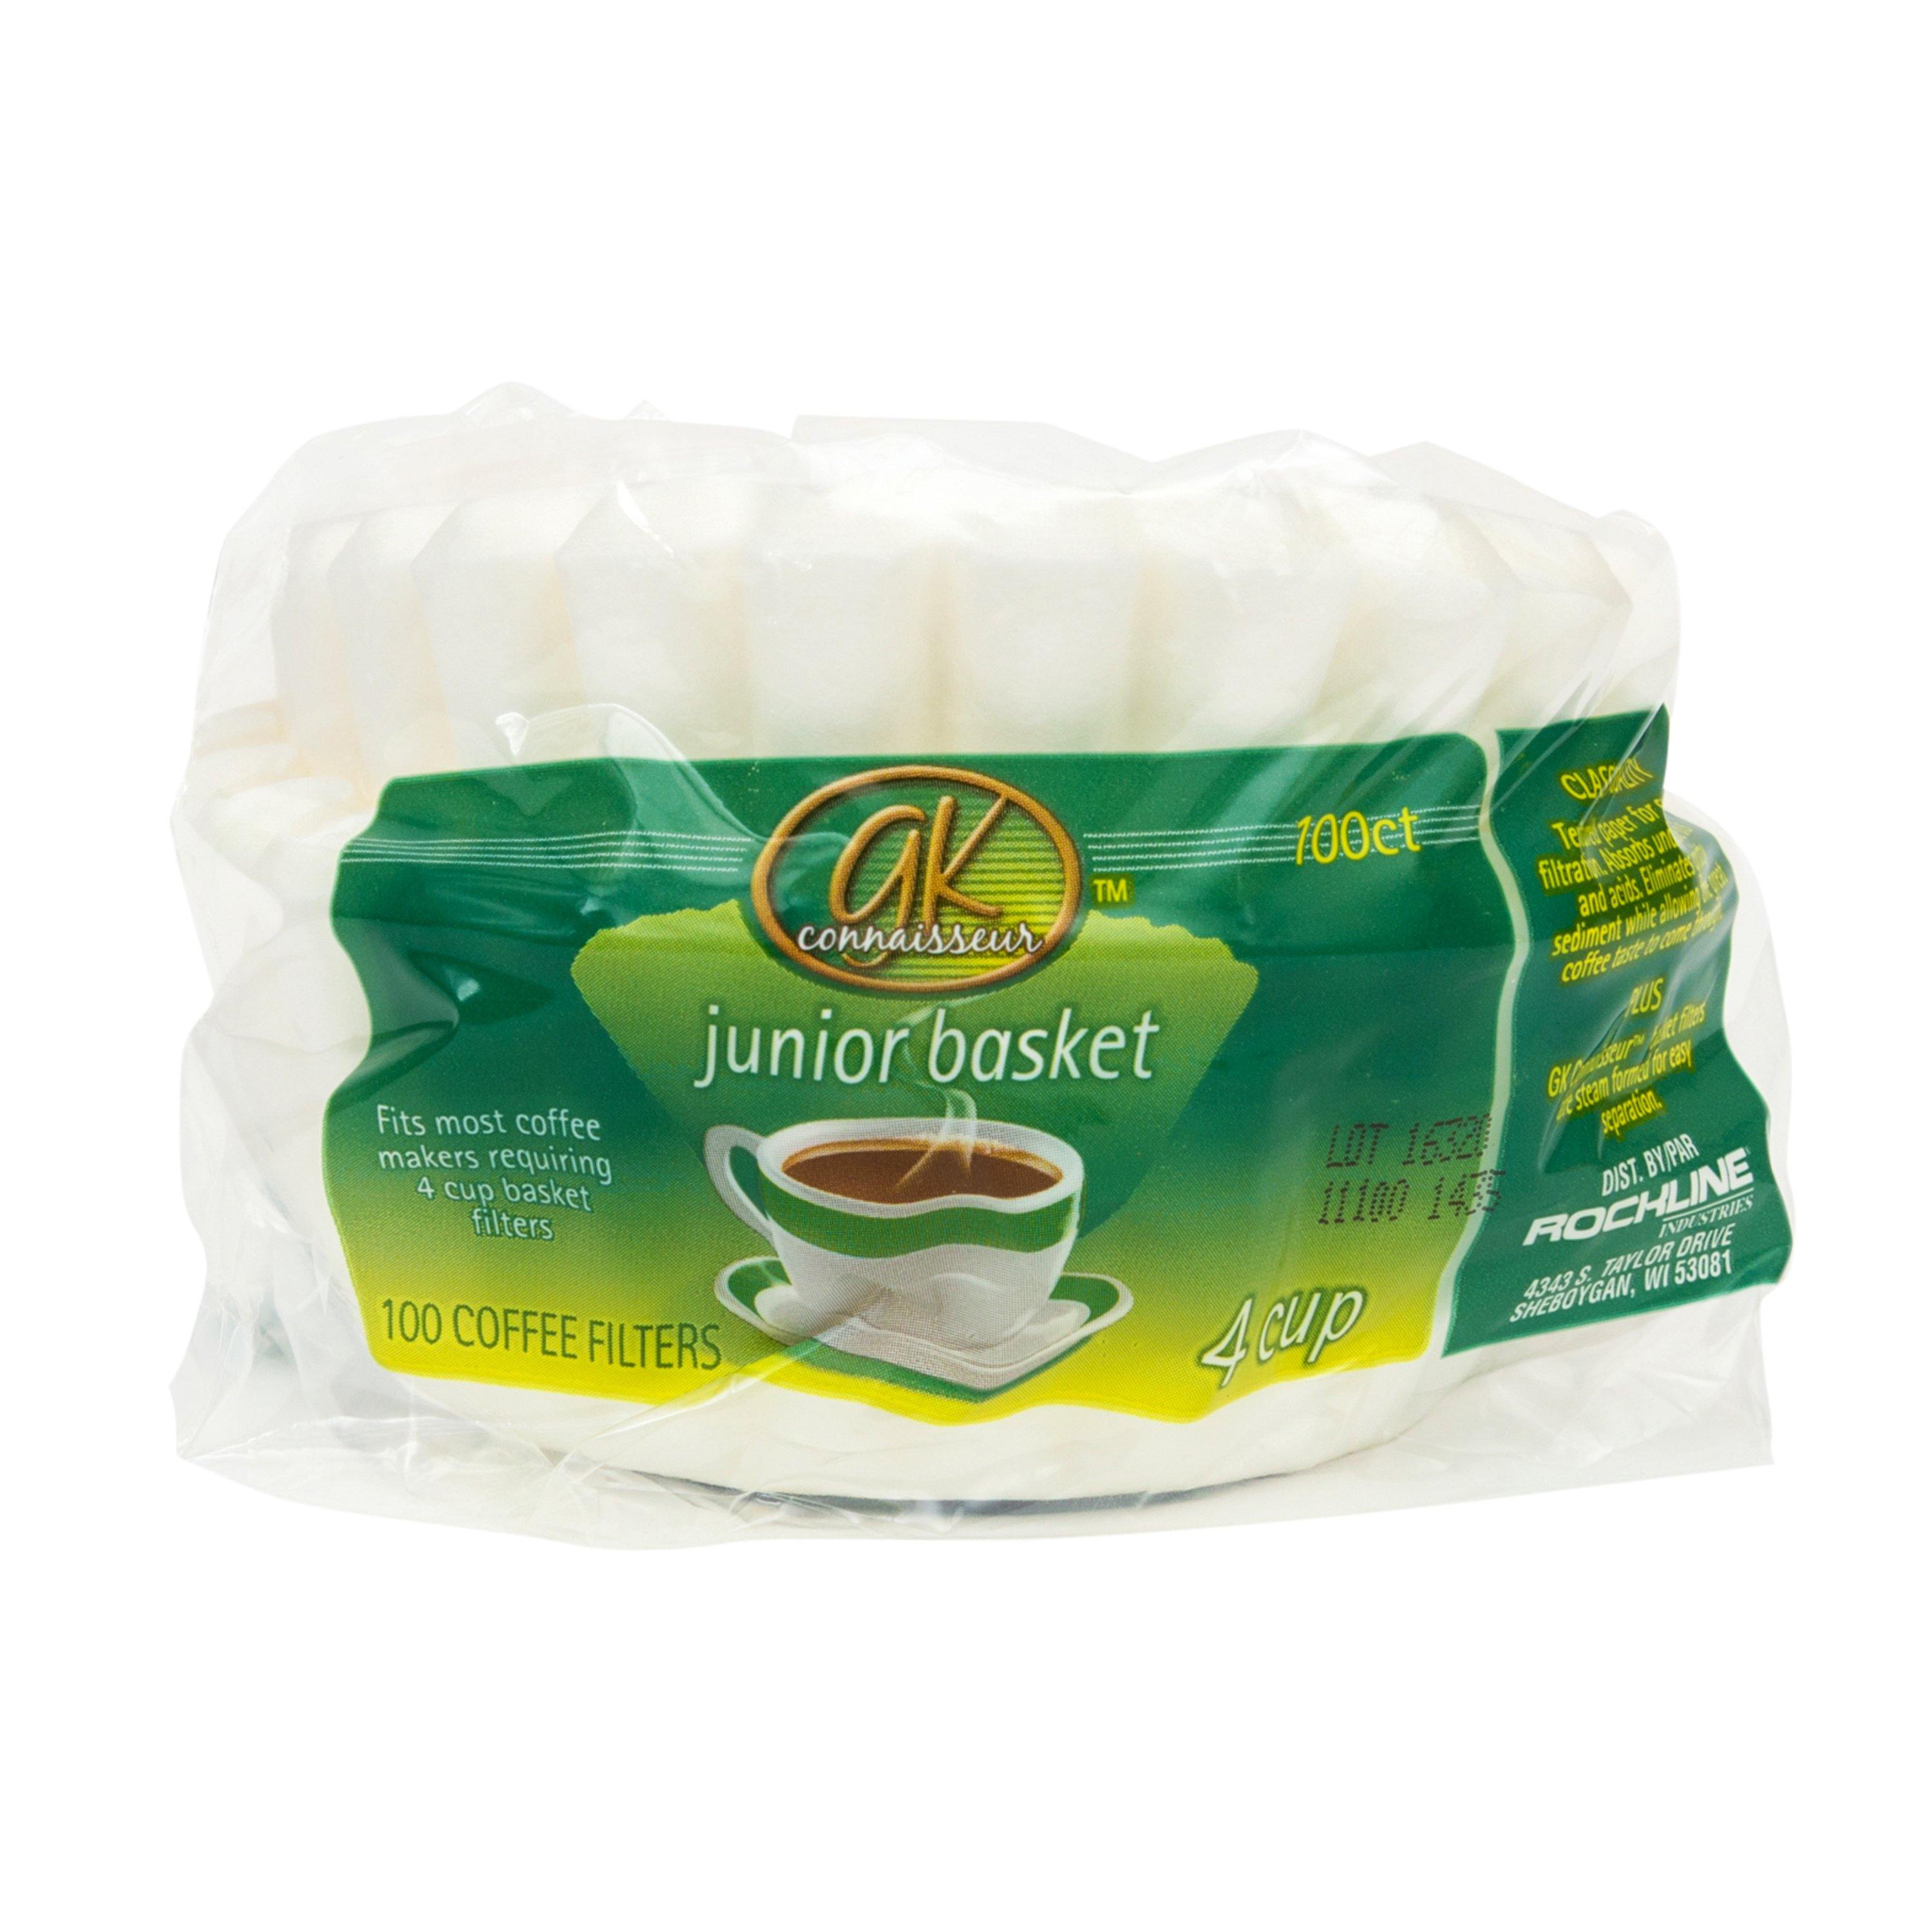 100 Basket Coffee Filters In Poly Bag. For 4 Cups Of Coffee. Fits Most Coffee Machines - Dollar Max Dépôt